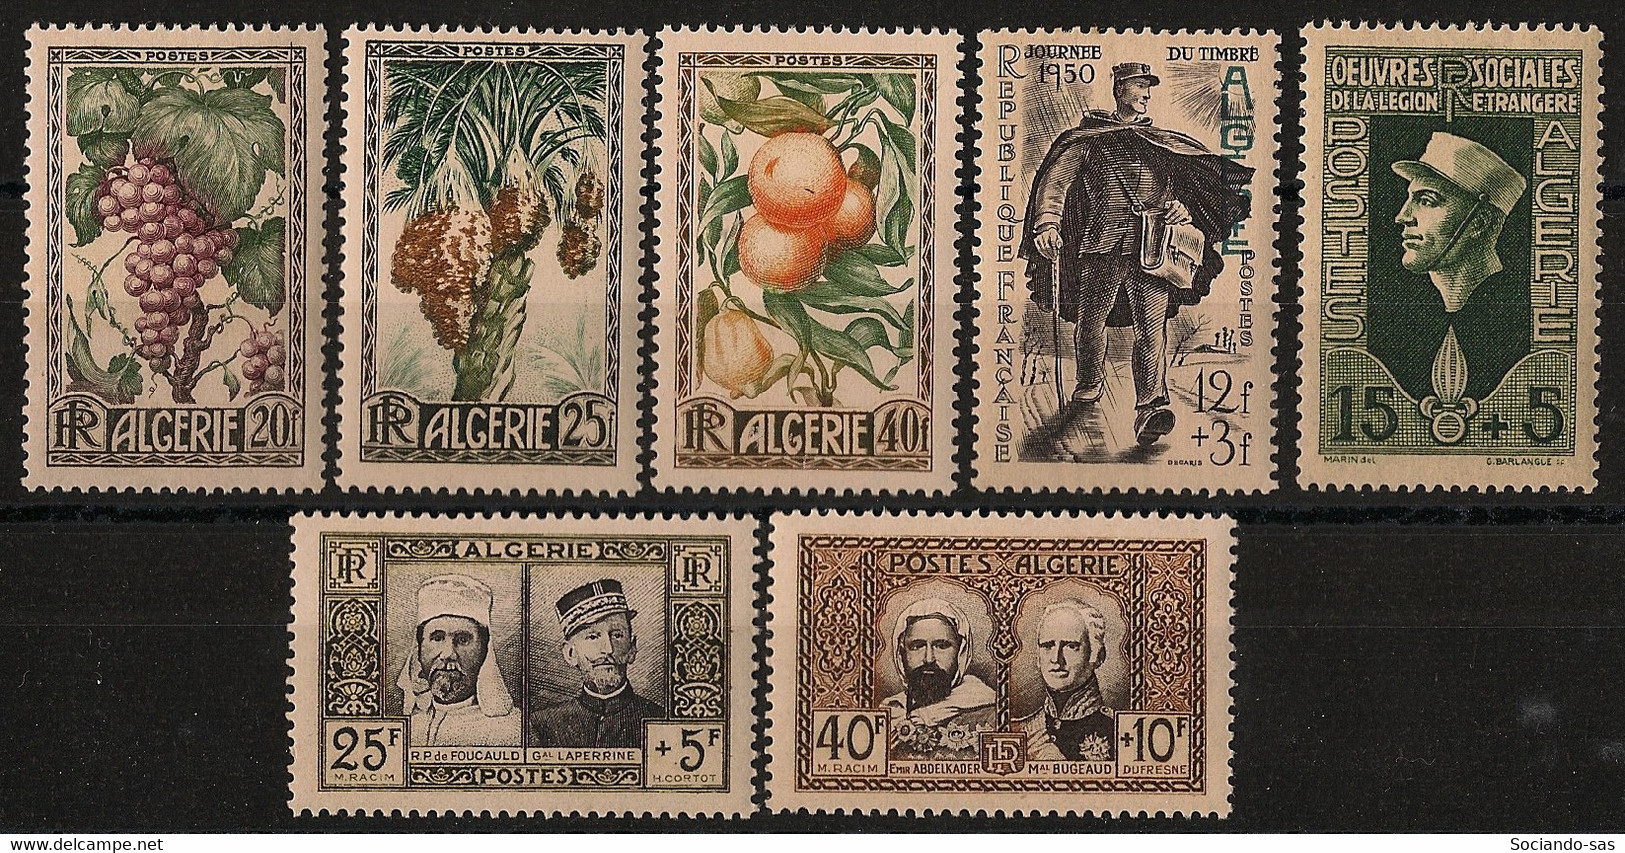 ALGERIE - Année Complète 1950 - N°Yv. 279 à 285 - Complet - 7 Valeurs - Neuf Luxe ** / MNH / Postfrisch - Full Years